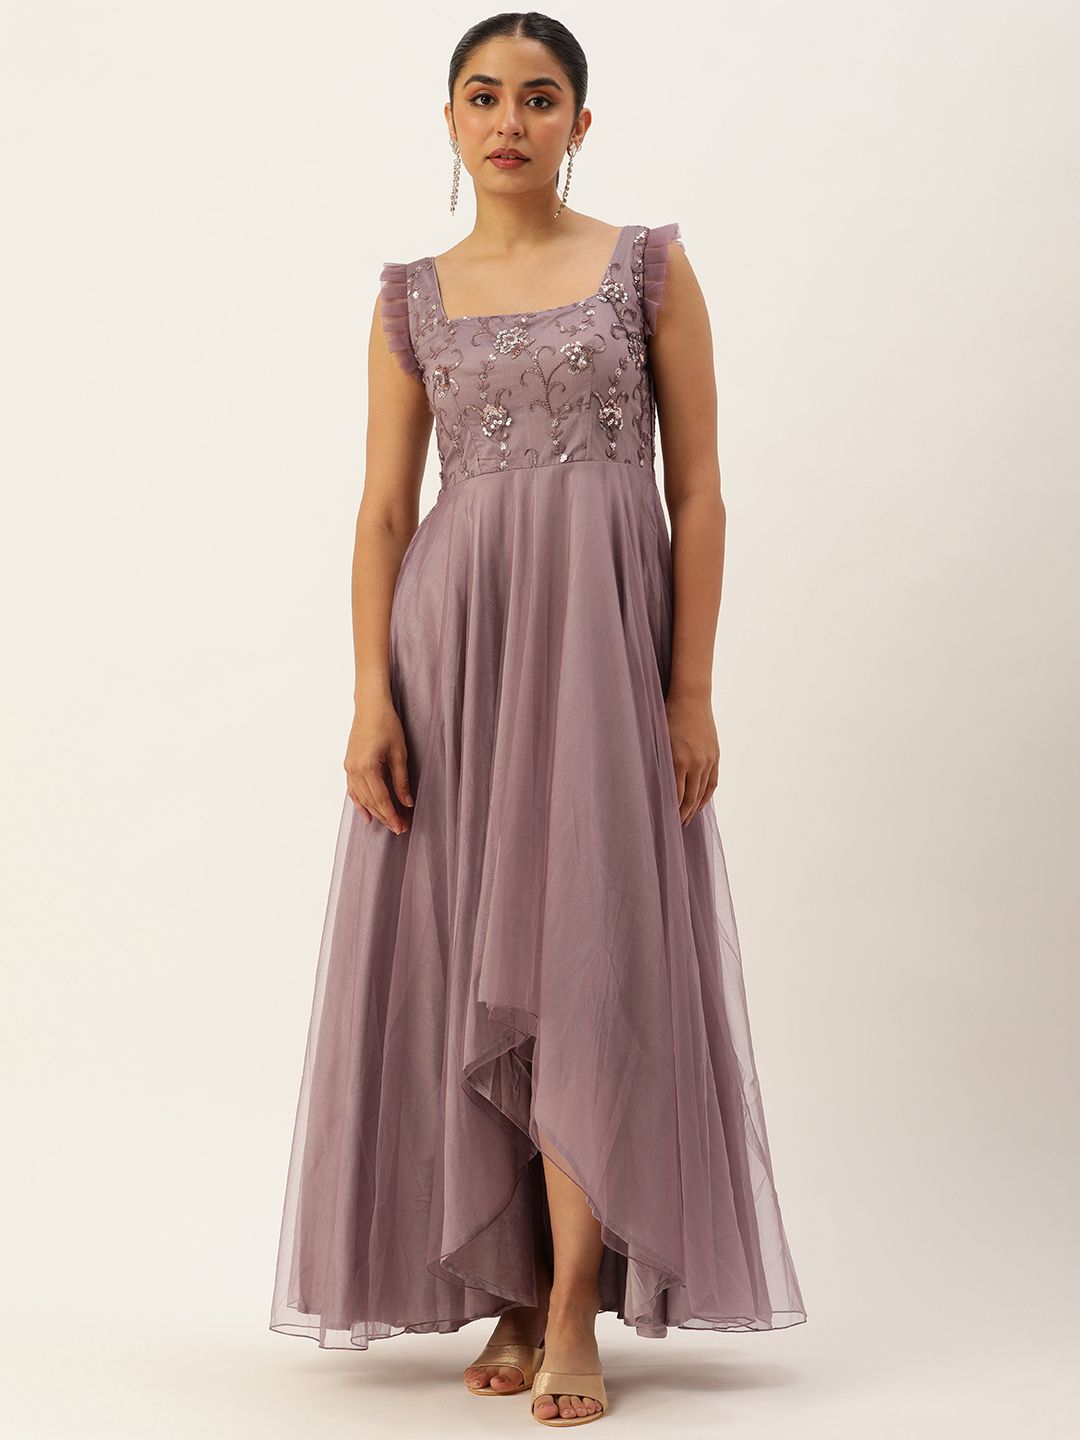 Ethnovog Floral Embellished Sequinned & Ruffled Detail Net Fit & Flare Maxi Dress Price in India